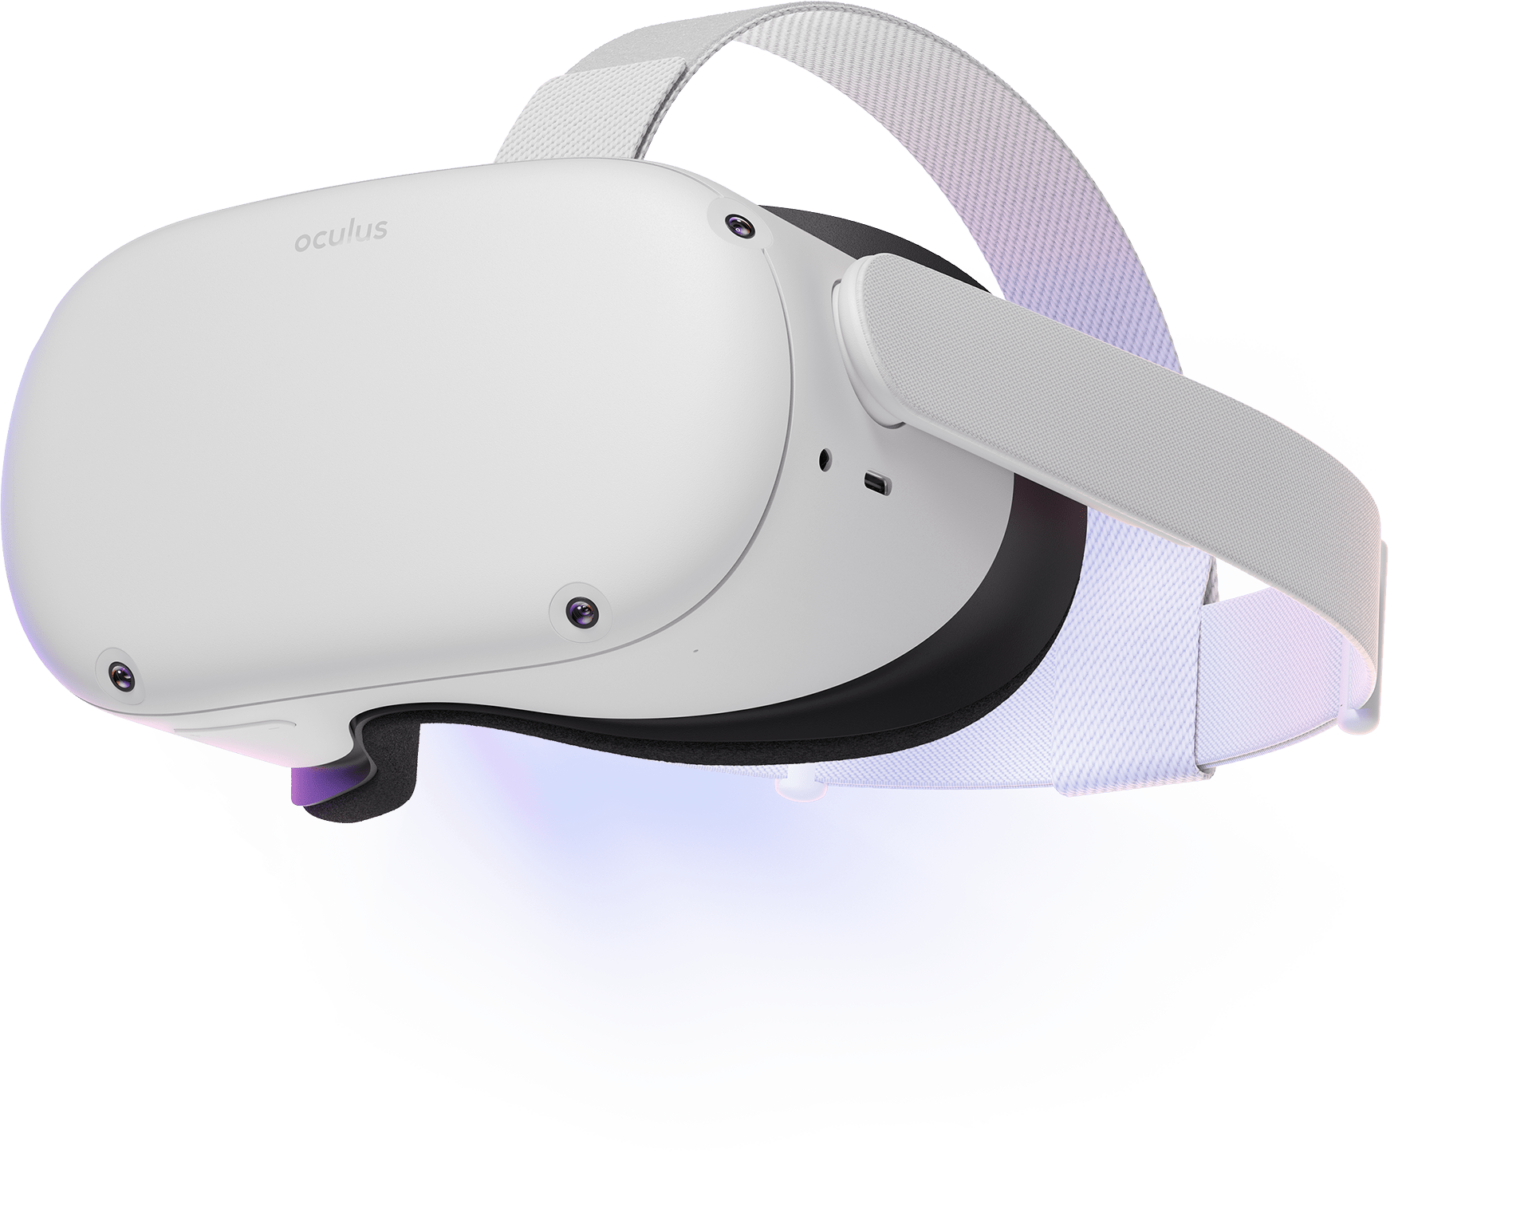 The Vr Headset That Could Take Virtual Reality Mainstre